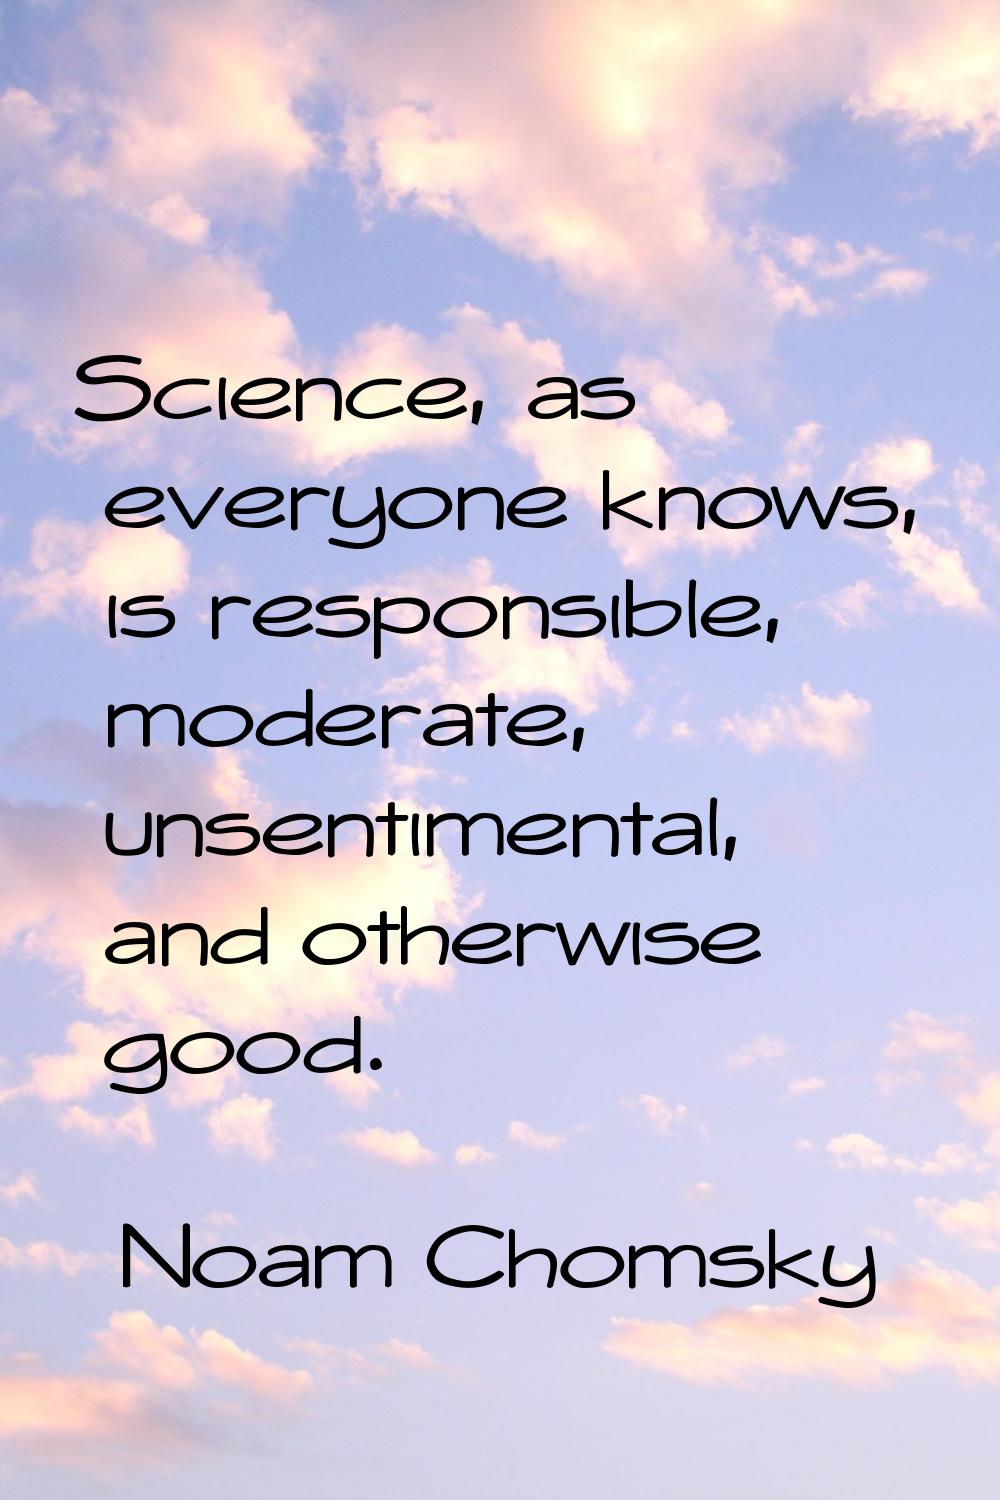 Science, as everyone knows, is responsible, moderate, unsentimental, and otherwise good.